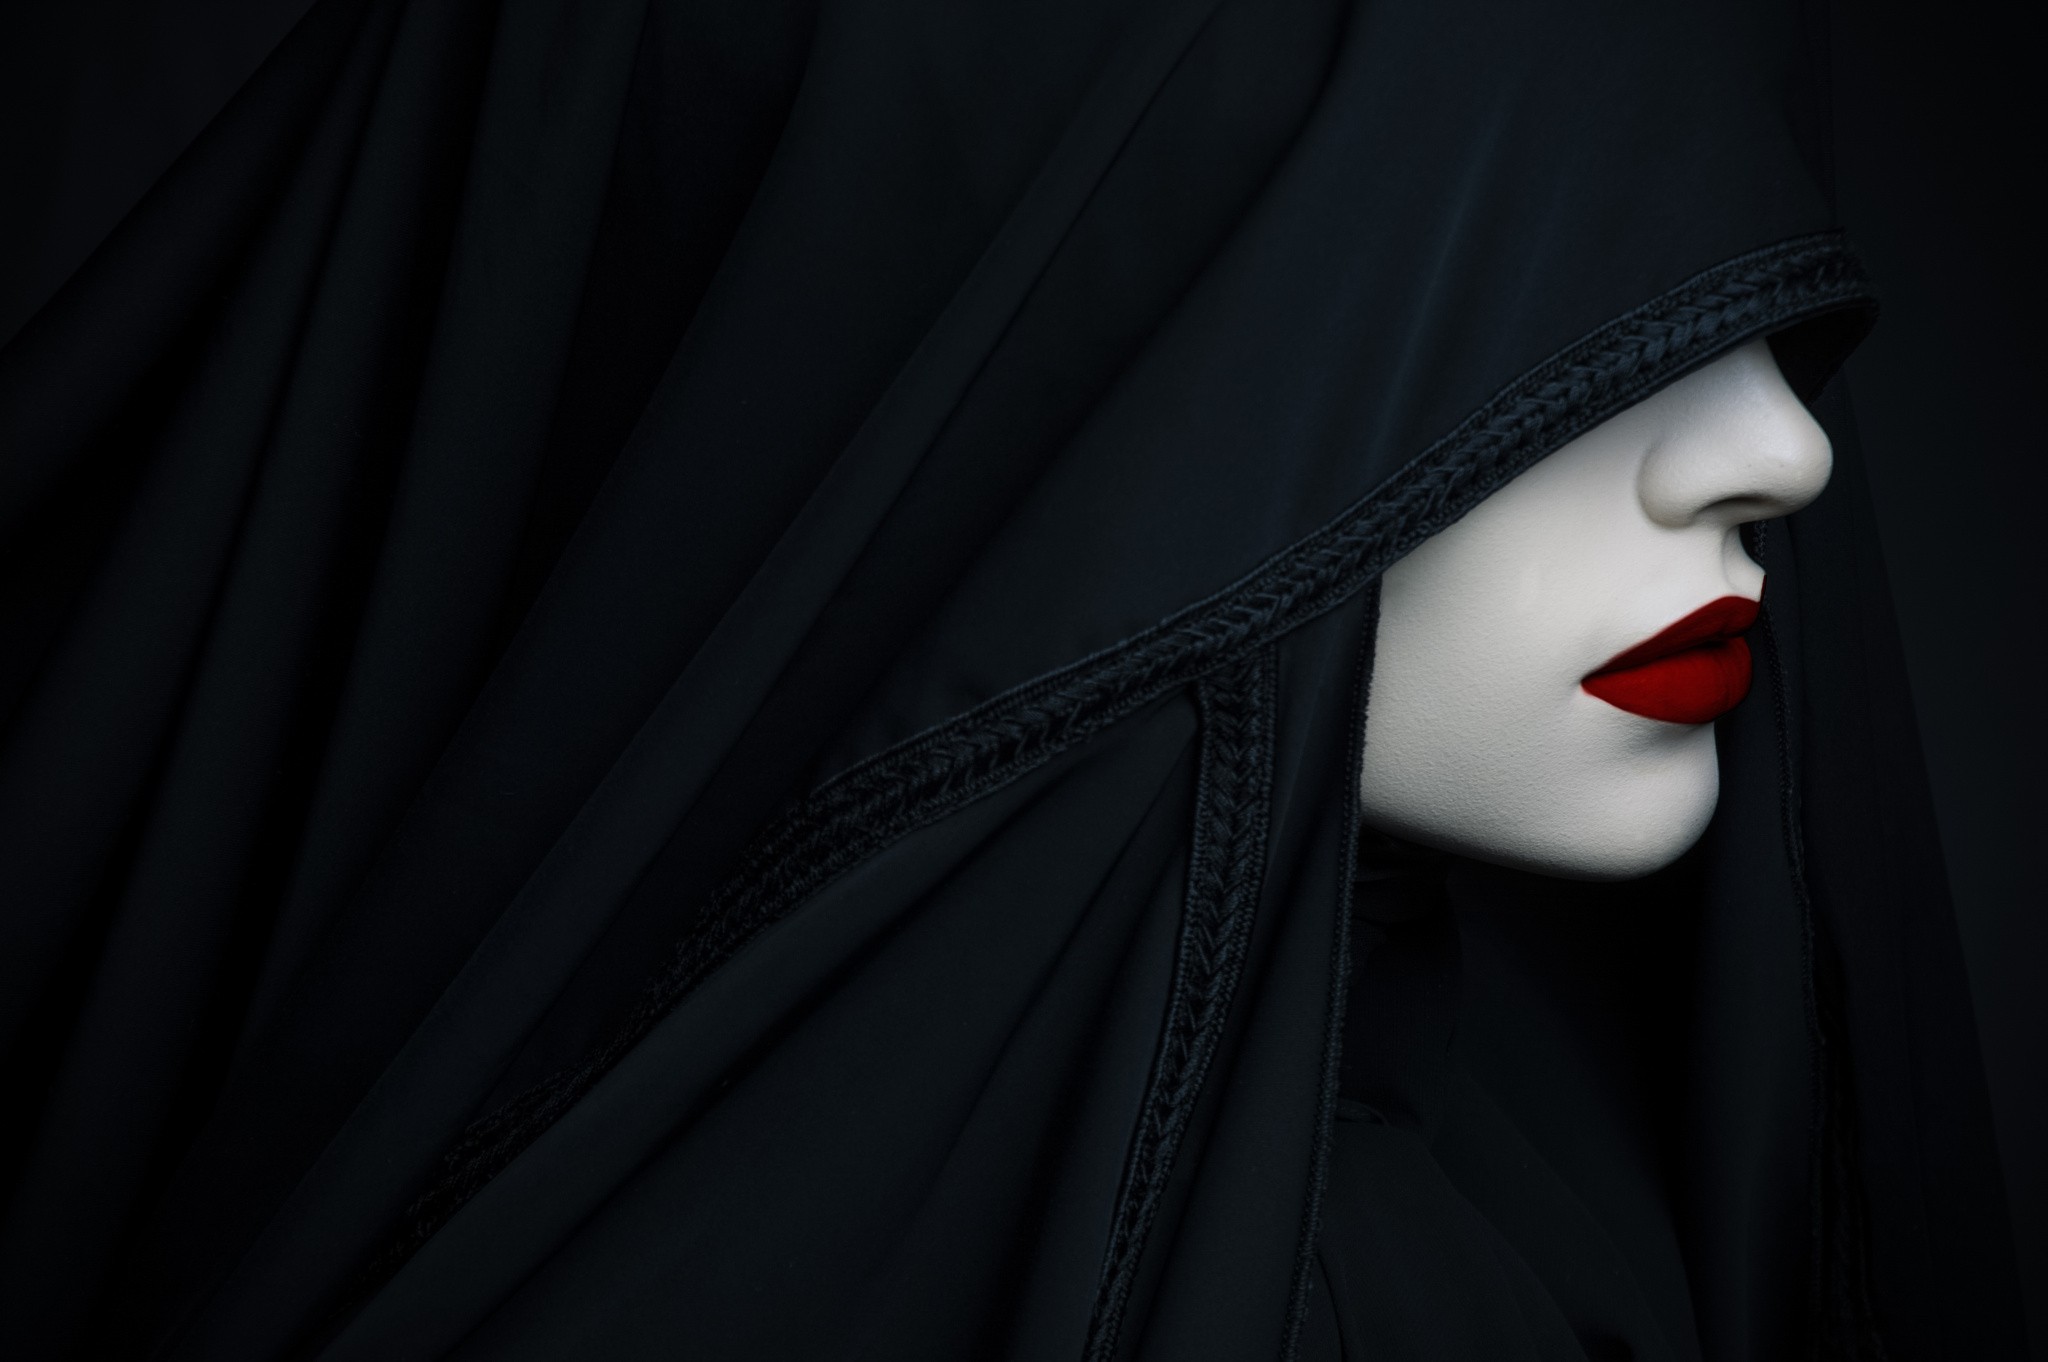 The girl in the black hoodie with the red lipstick.